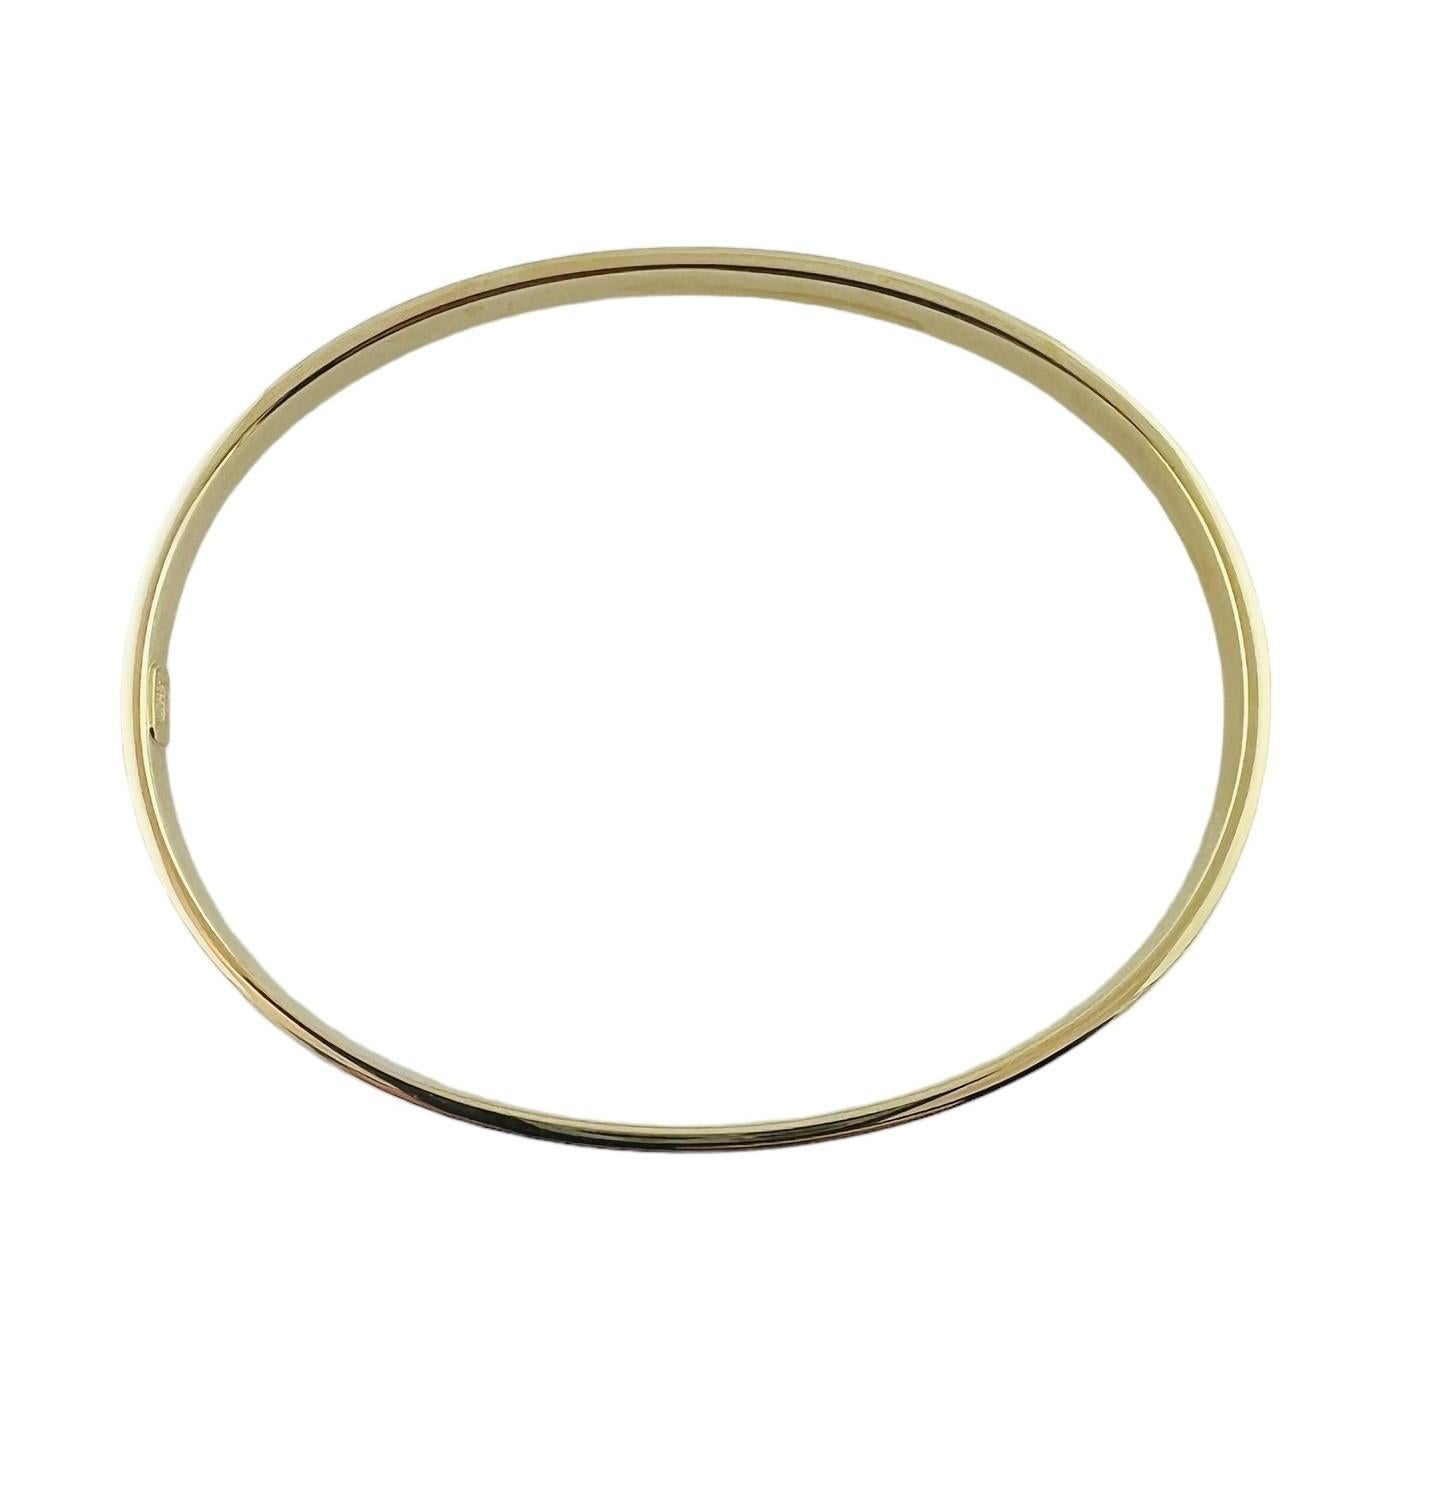 Tiffany & Co. 18K Yellow Gold Oval Bangle Bracelet

This oval Tiffany bangle bracelet is perfect for wearing alone or layered with other bangles

7.5